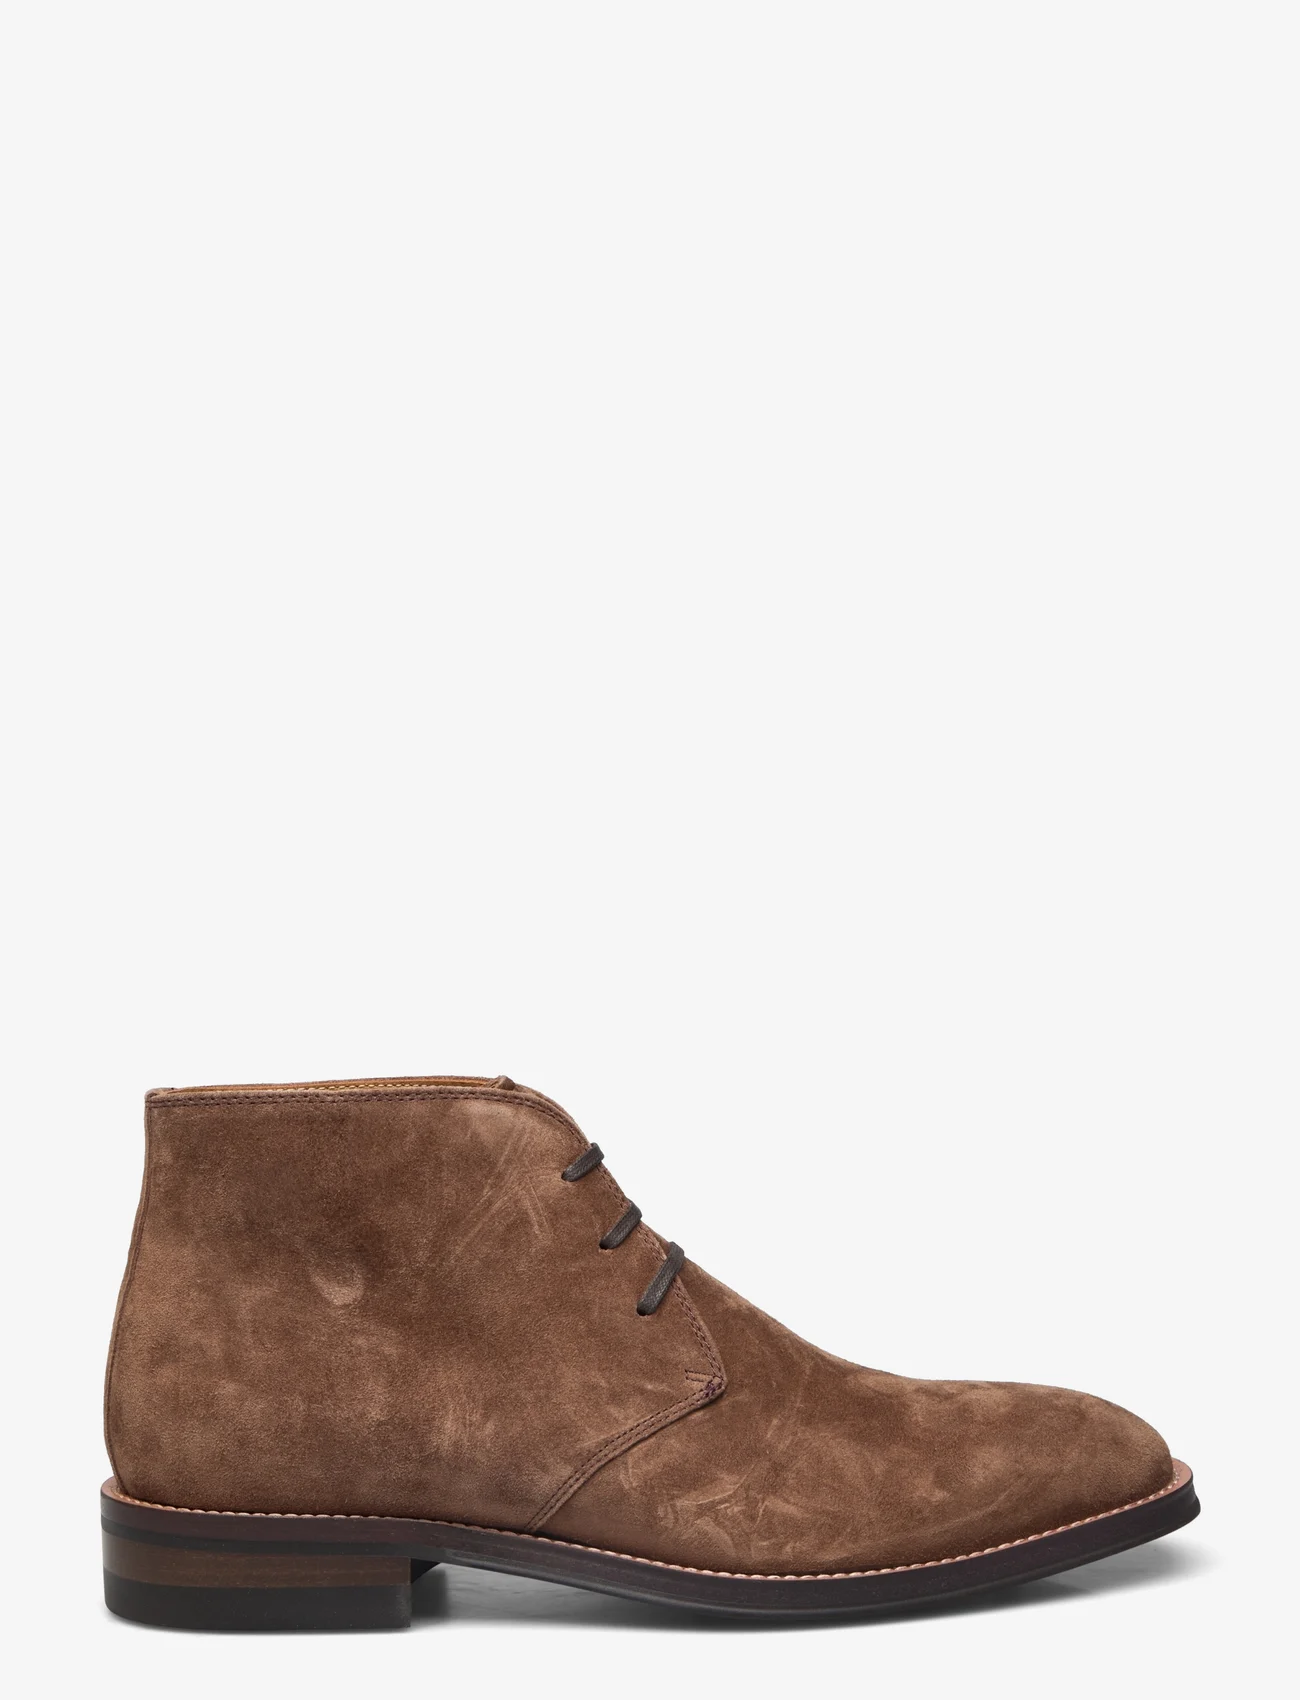 Dune London - maloney - laced shoes - brown - 1